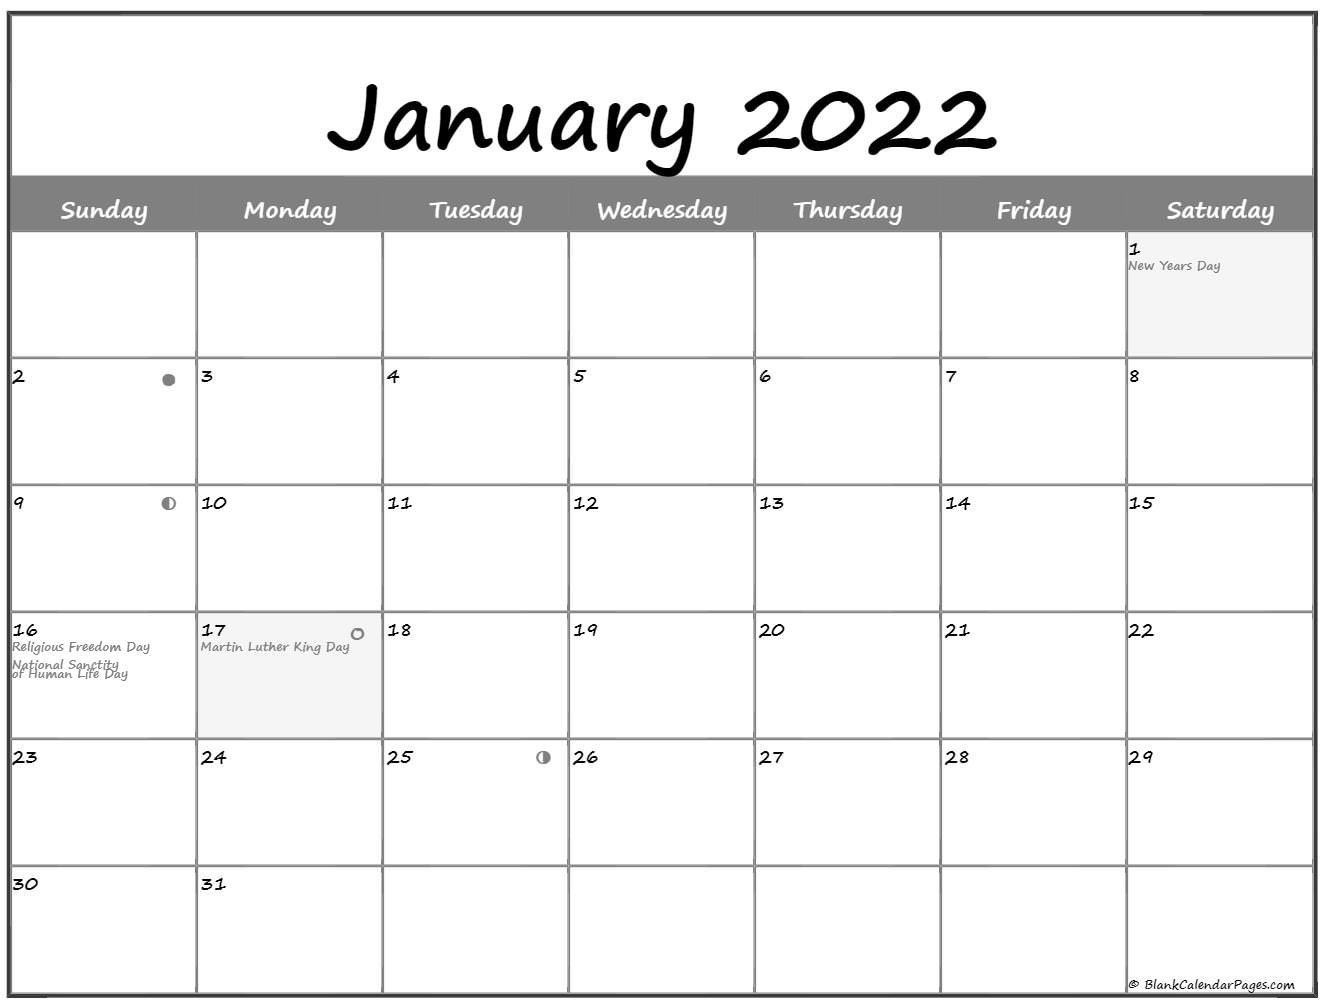 Take Calendar For January 2022 With Holidays